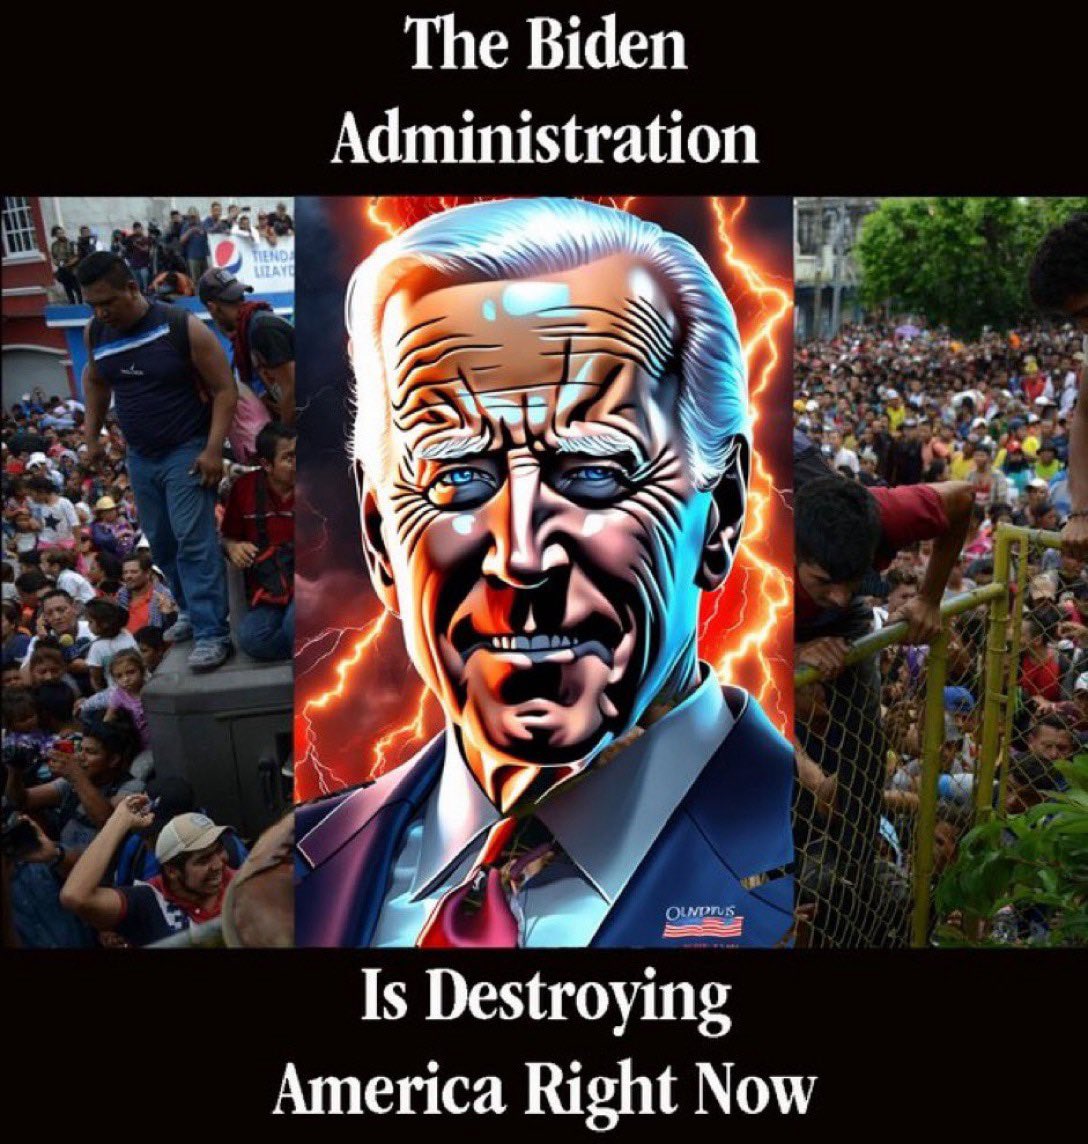 Let’s face it; this is what you got with a vote for Biden. ✳️A Puppet. ✳️Open Borders. ✳️Mass Inflation. ✳️Terrible Economy. ✳️Unaffordable Housing. ✳️Weak Military. ✳️Runaway National Debt. ✳️Cultural Warfare. ✳️Destruction of Liberties. ✳️Global Conflict. ✳️Serial Liar.…